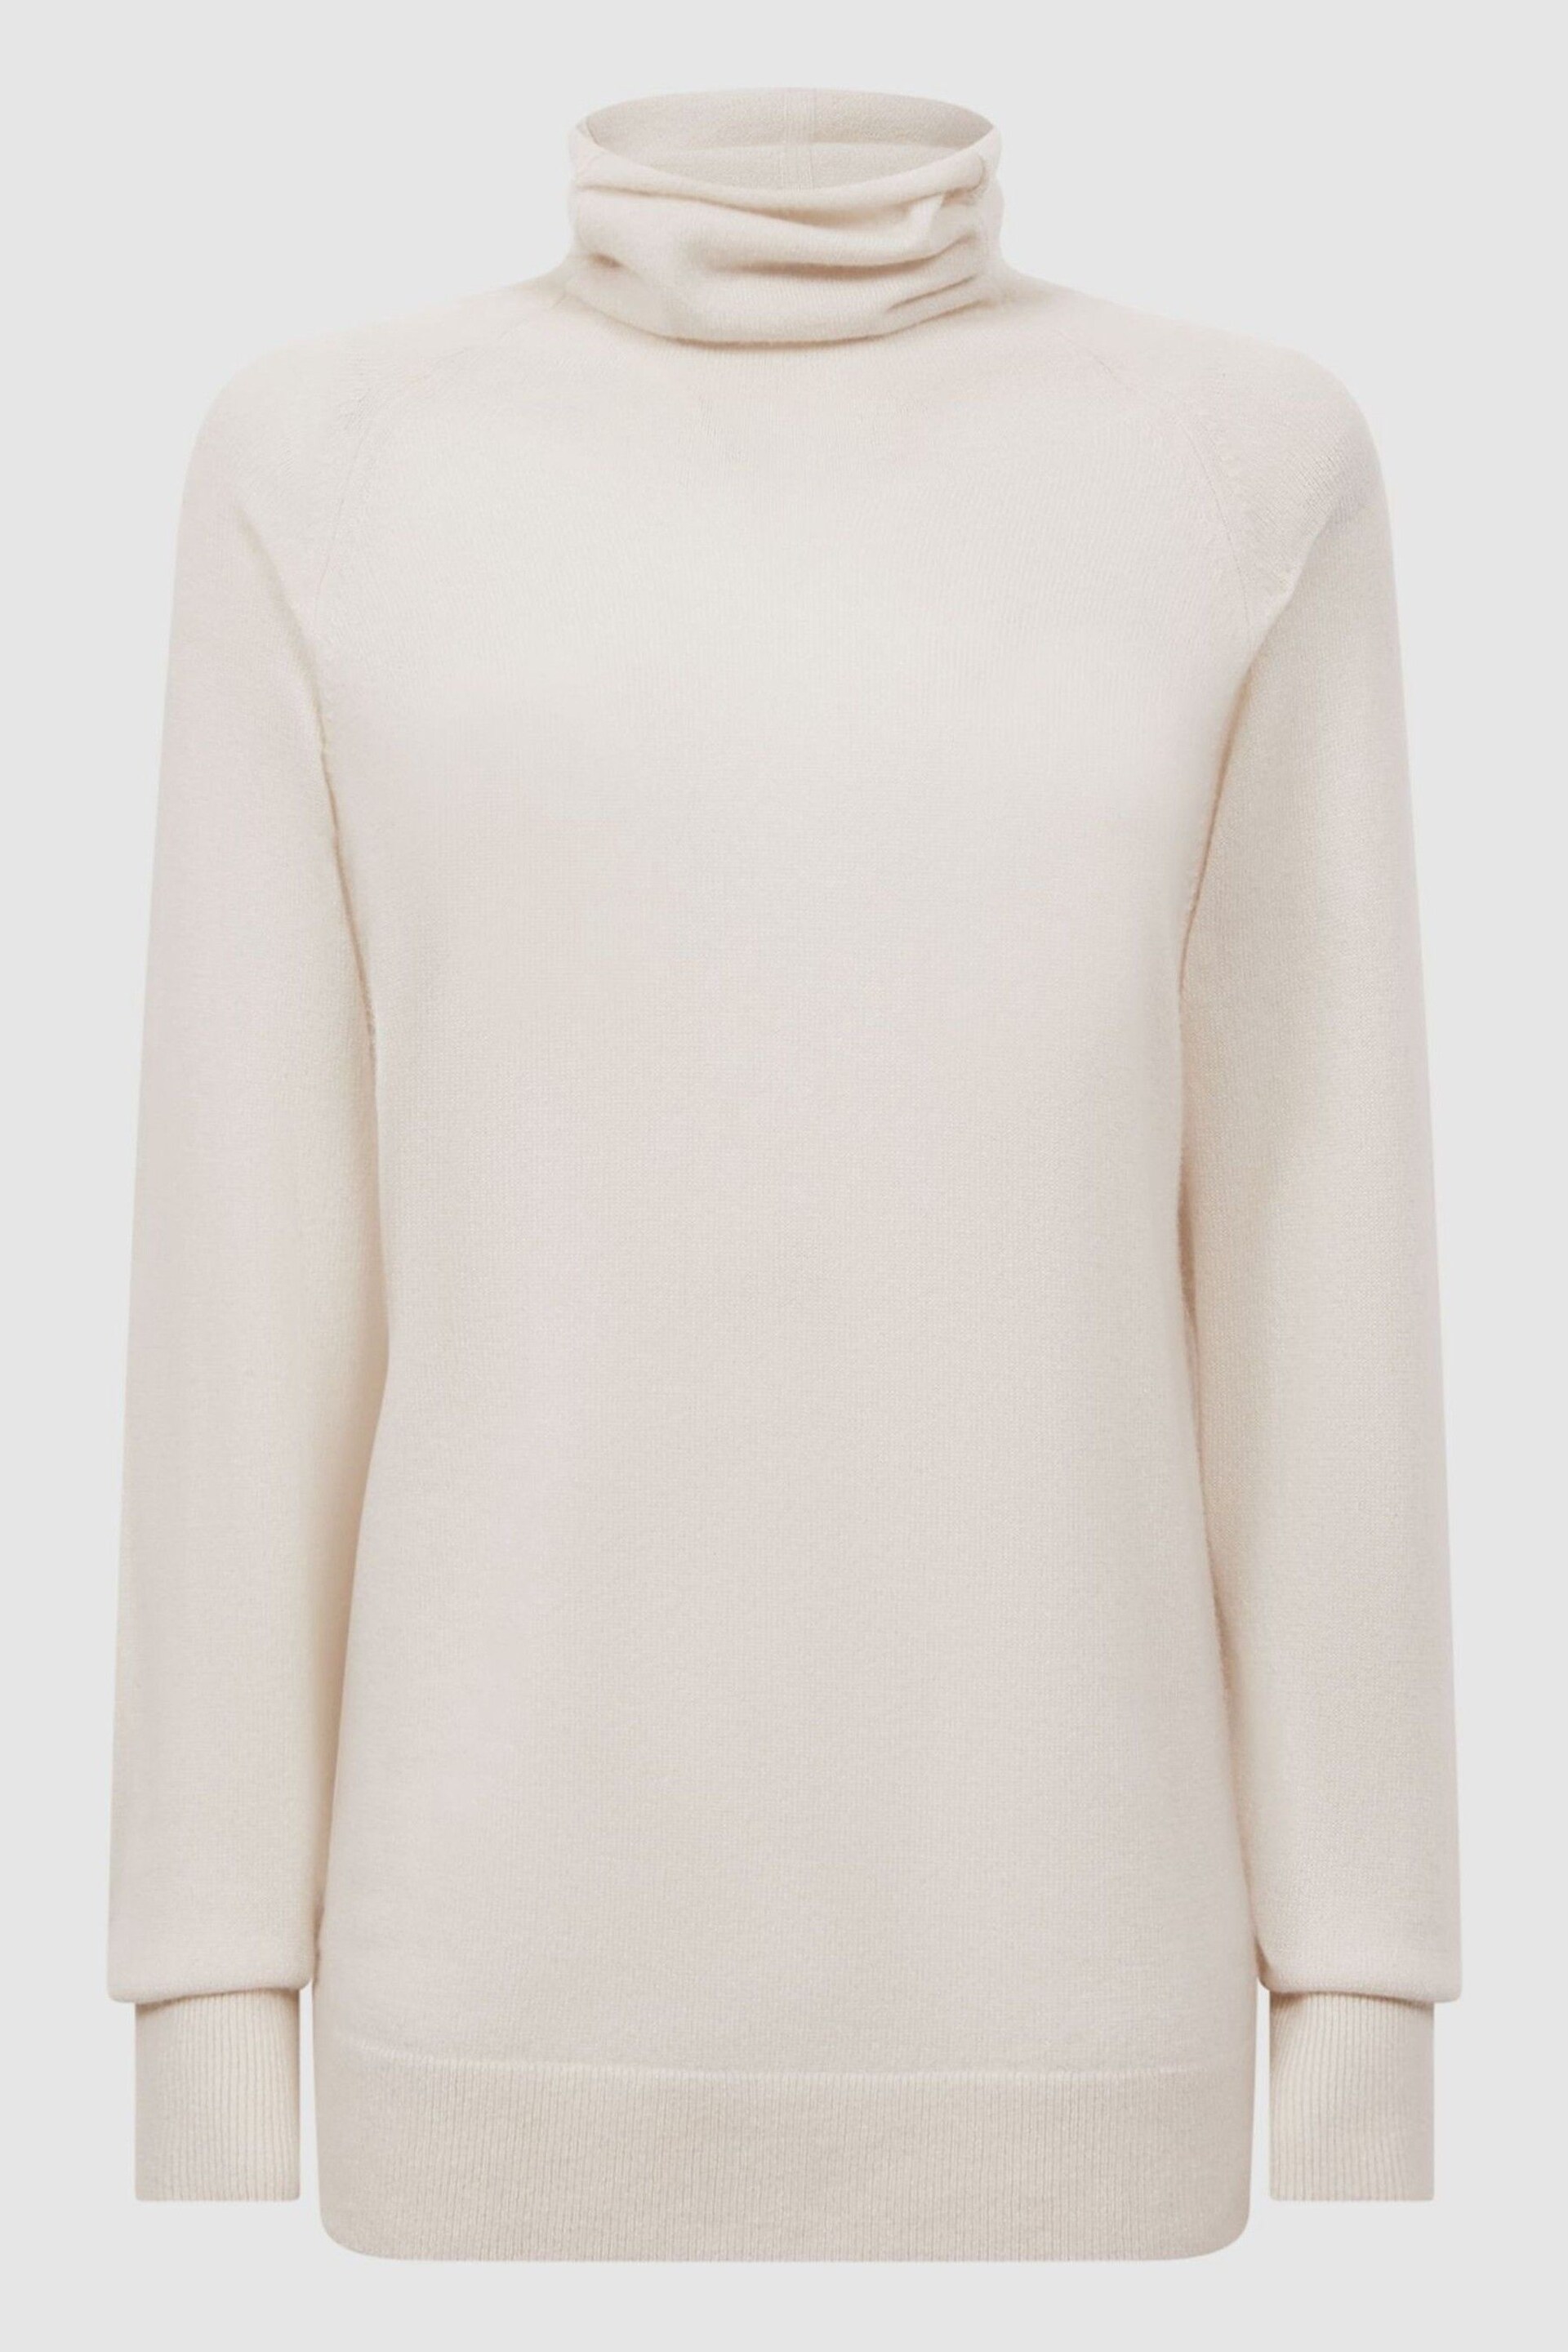 Reiss Cream Florence Relaxed Cashmere Roll Neck Top - Image 2 of 7